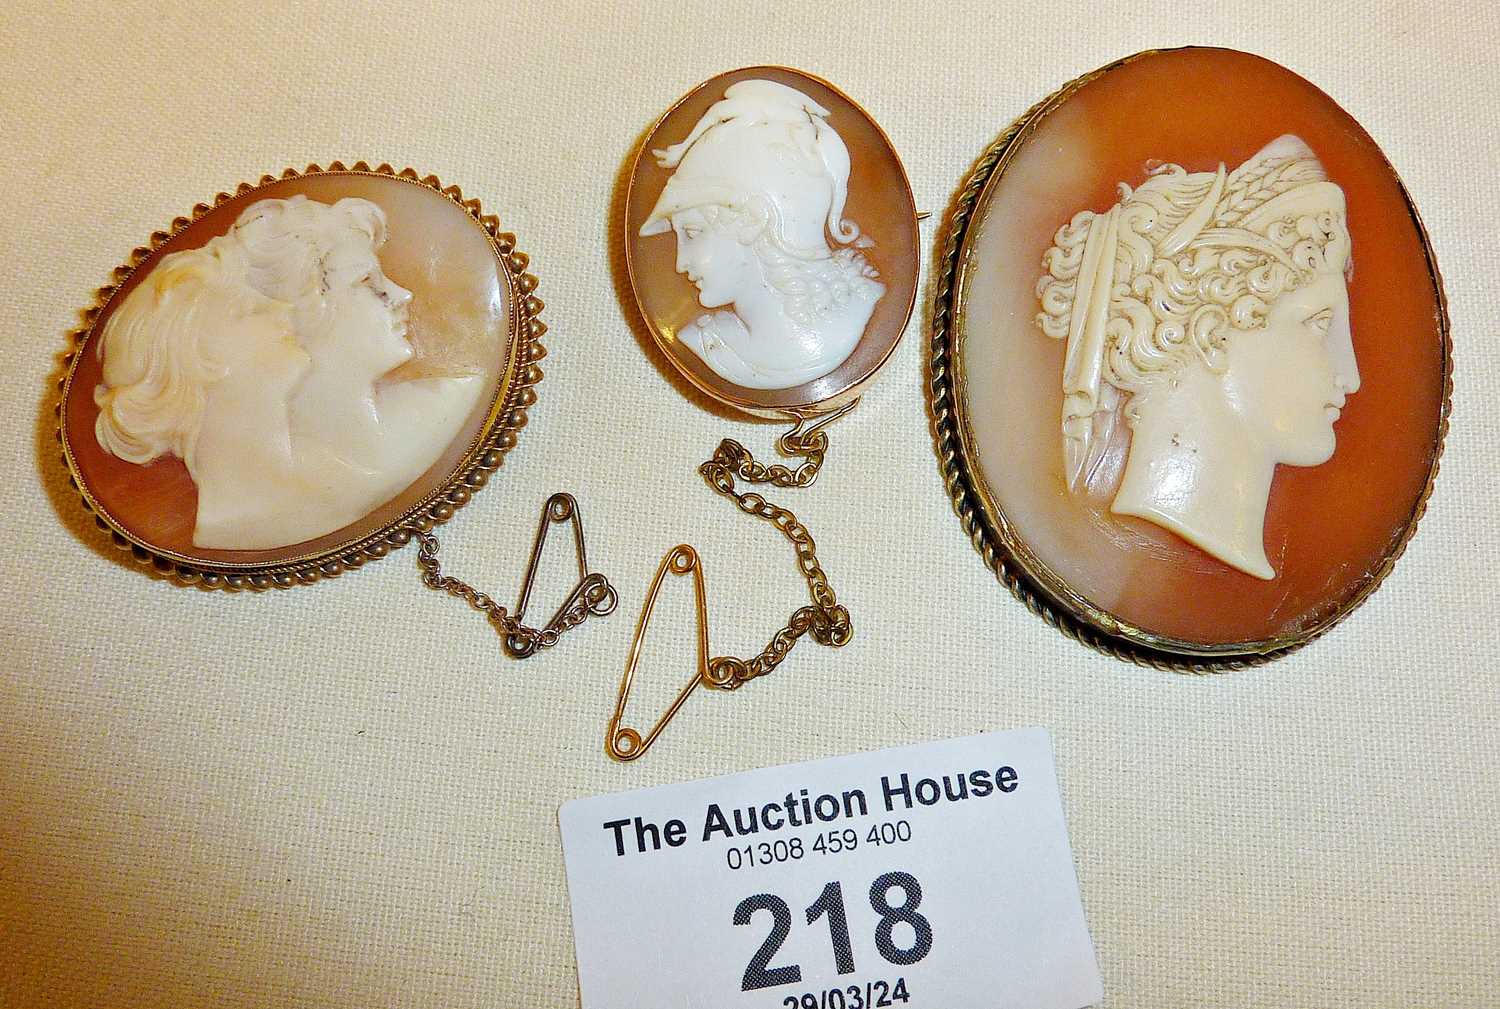 Three antique shell cameo brooches, largest finely carved classical lady profile - approx. 5cm high, - Image 3 of 6